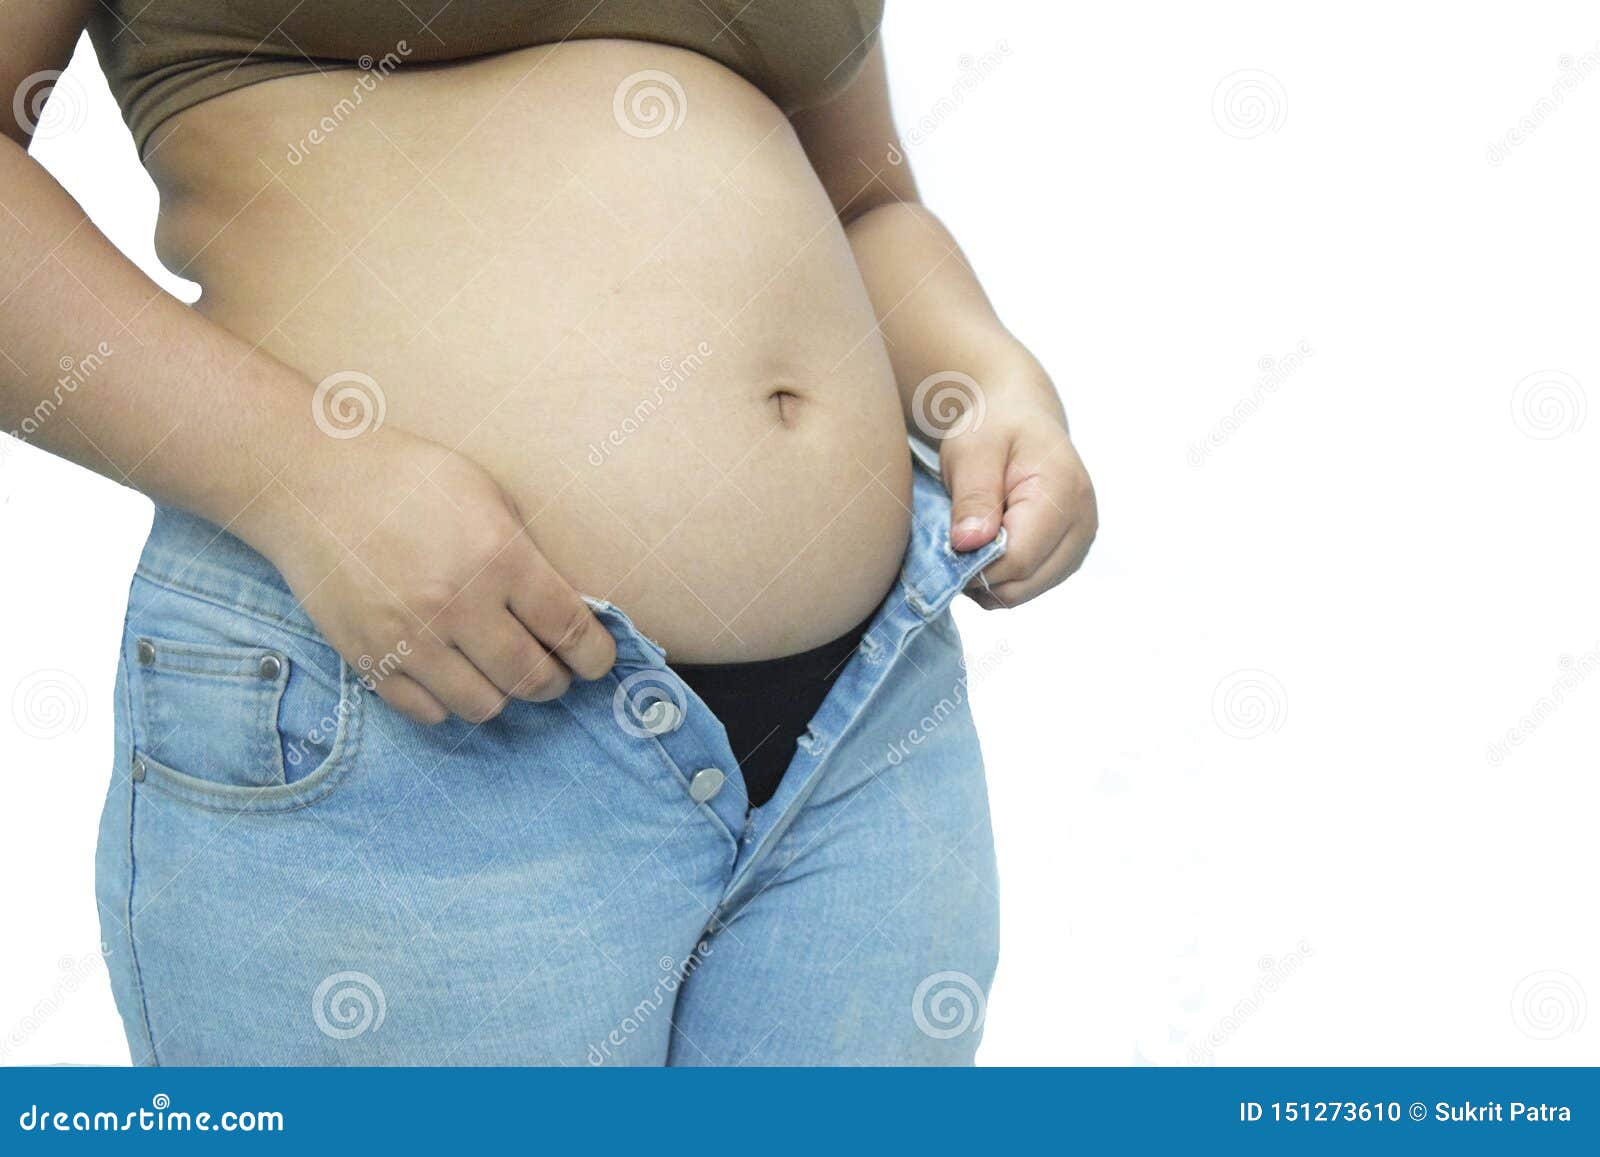 https://thumbs.dreamstime.com/z/asian-women-overweight-has-excess-fat-around-her-stomach-making-unable-to-wear-original-pants-must-lose-weight-exercise-151273610.jpg